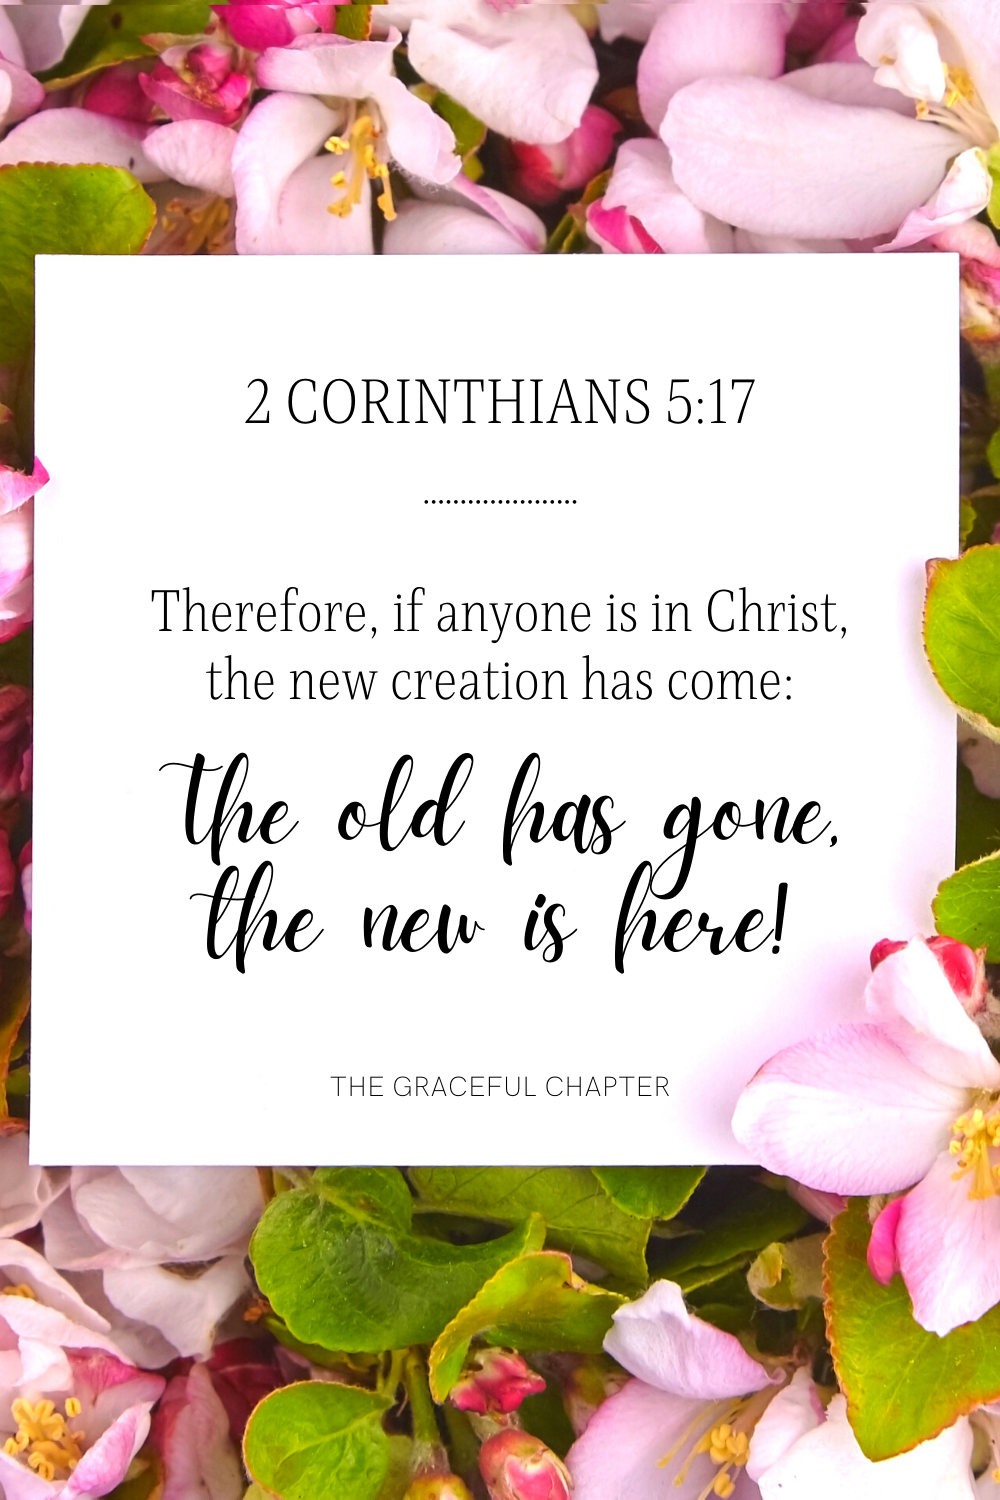 Therefore, if anyone is in Christ, the new creation has come: The old has gone, the new is here! 2 Corinthians 5:17